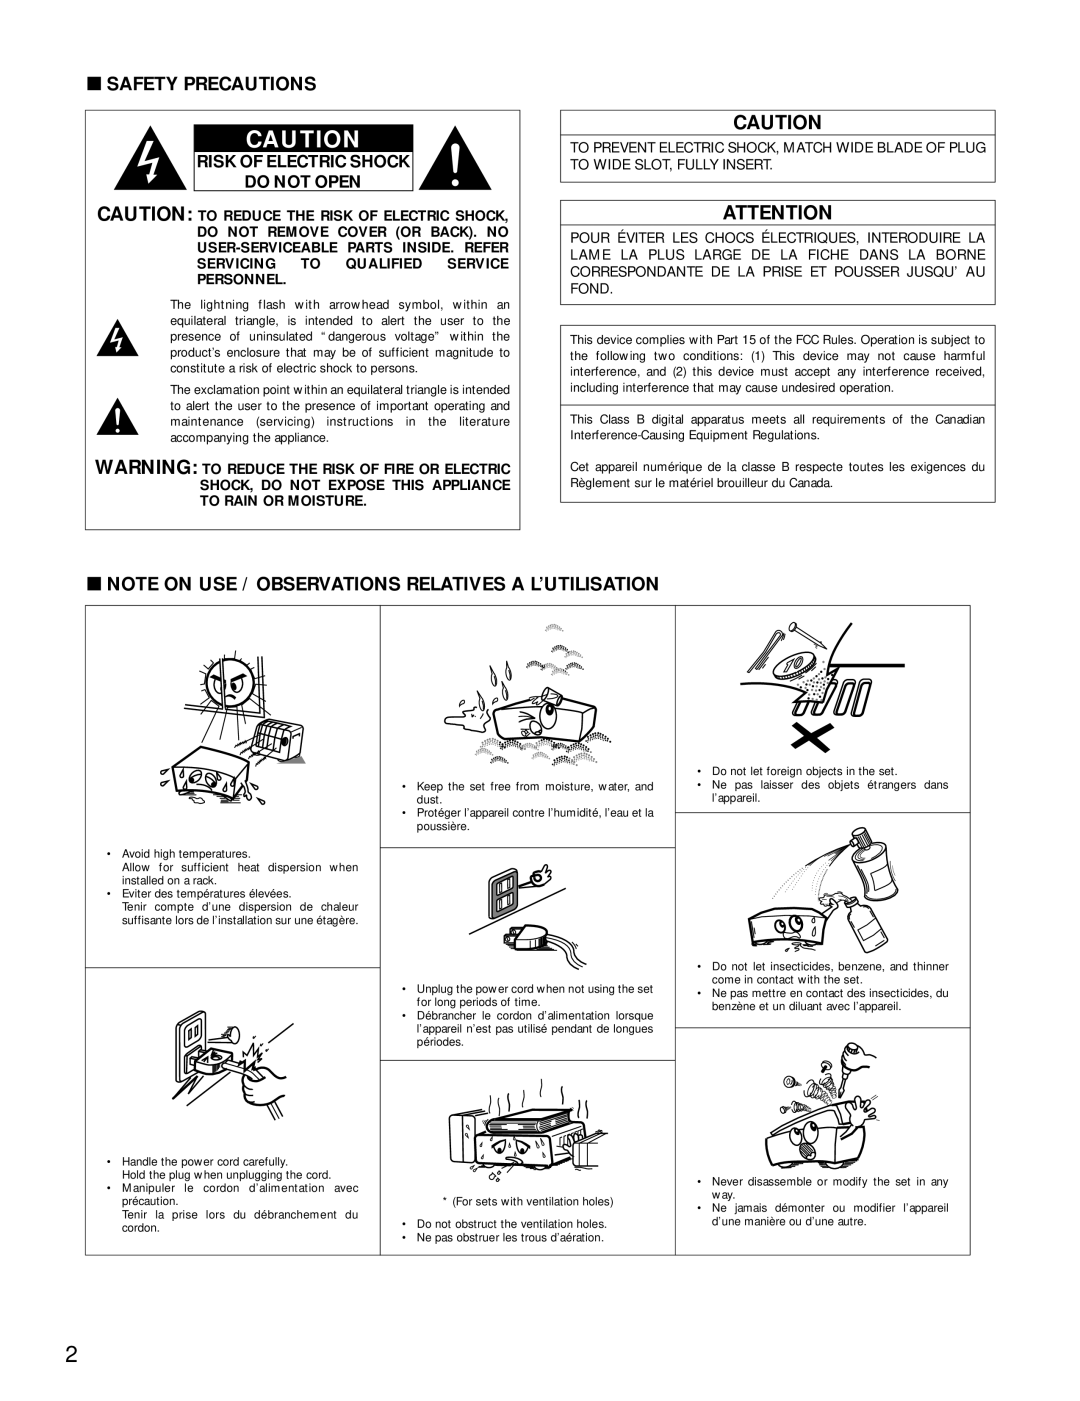 Denon AVR-4800 manual 2SAFETY PRECAUTIONS, Risk Of Electric Shock Do Not Open, Servicing To Qualified Service Personnel 